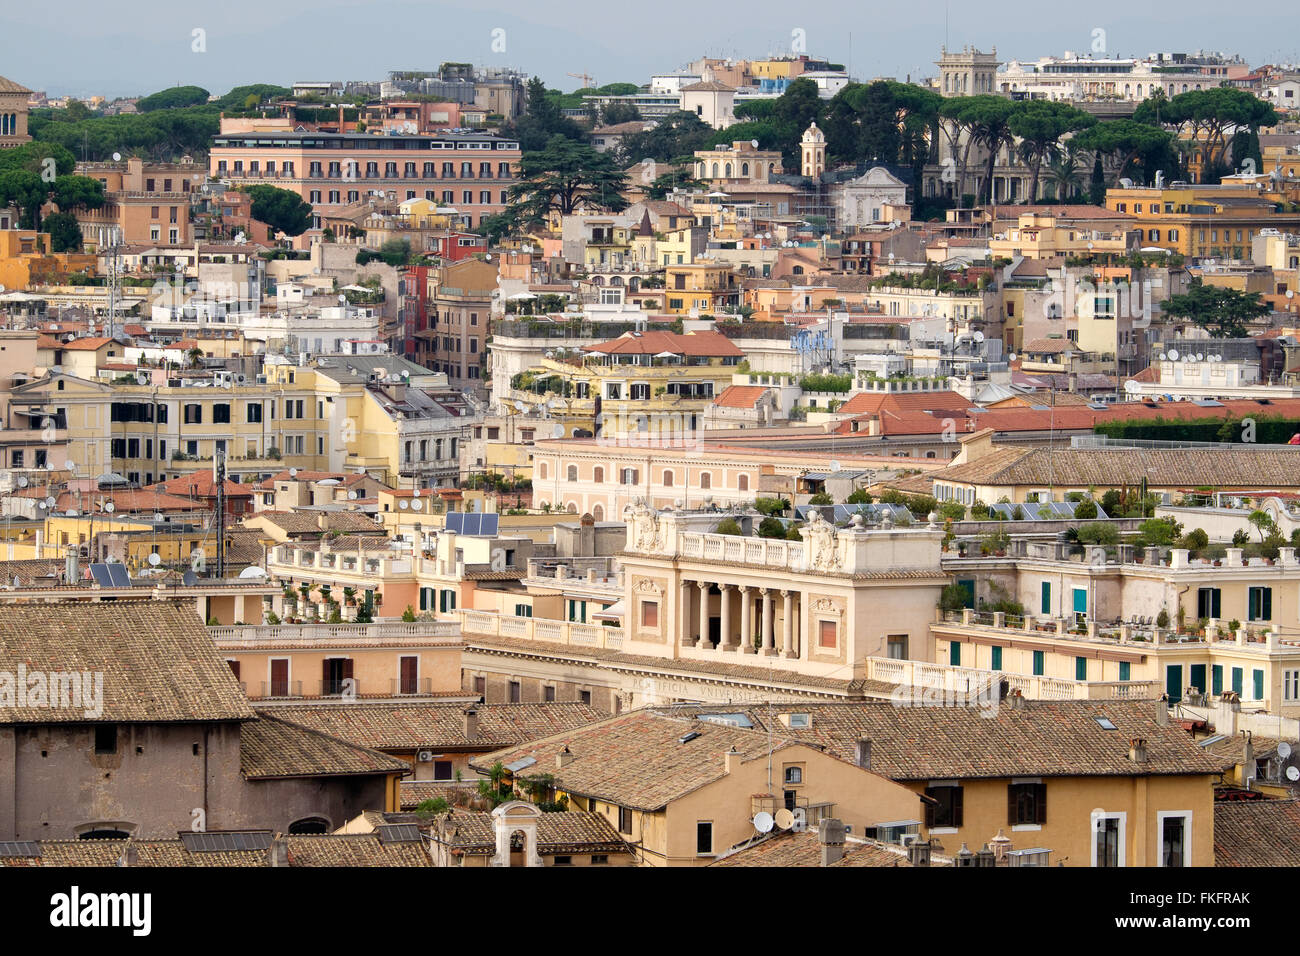 Colorful rooftops adorn ancient buildings throughout Rome, Italy. Stock Photo